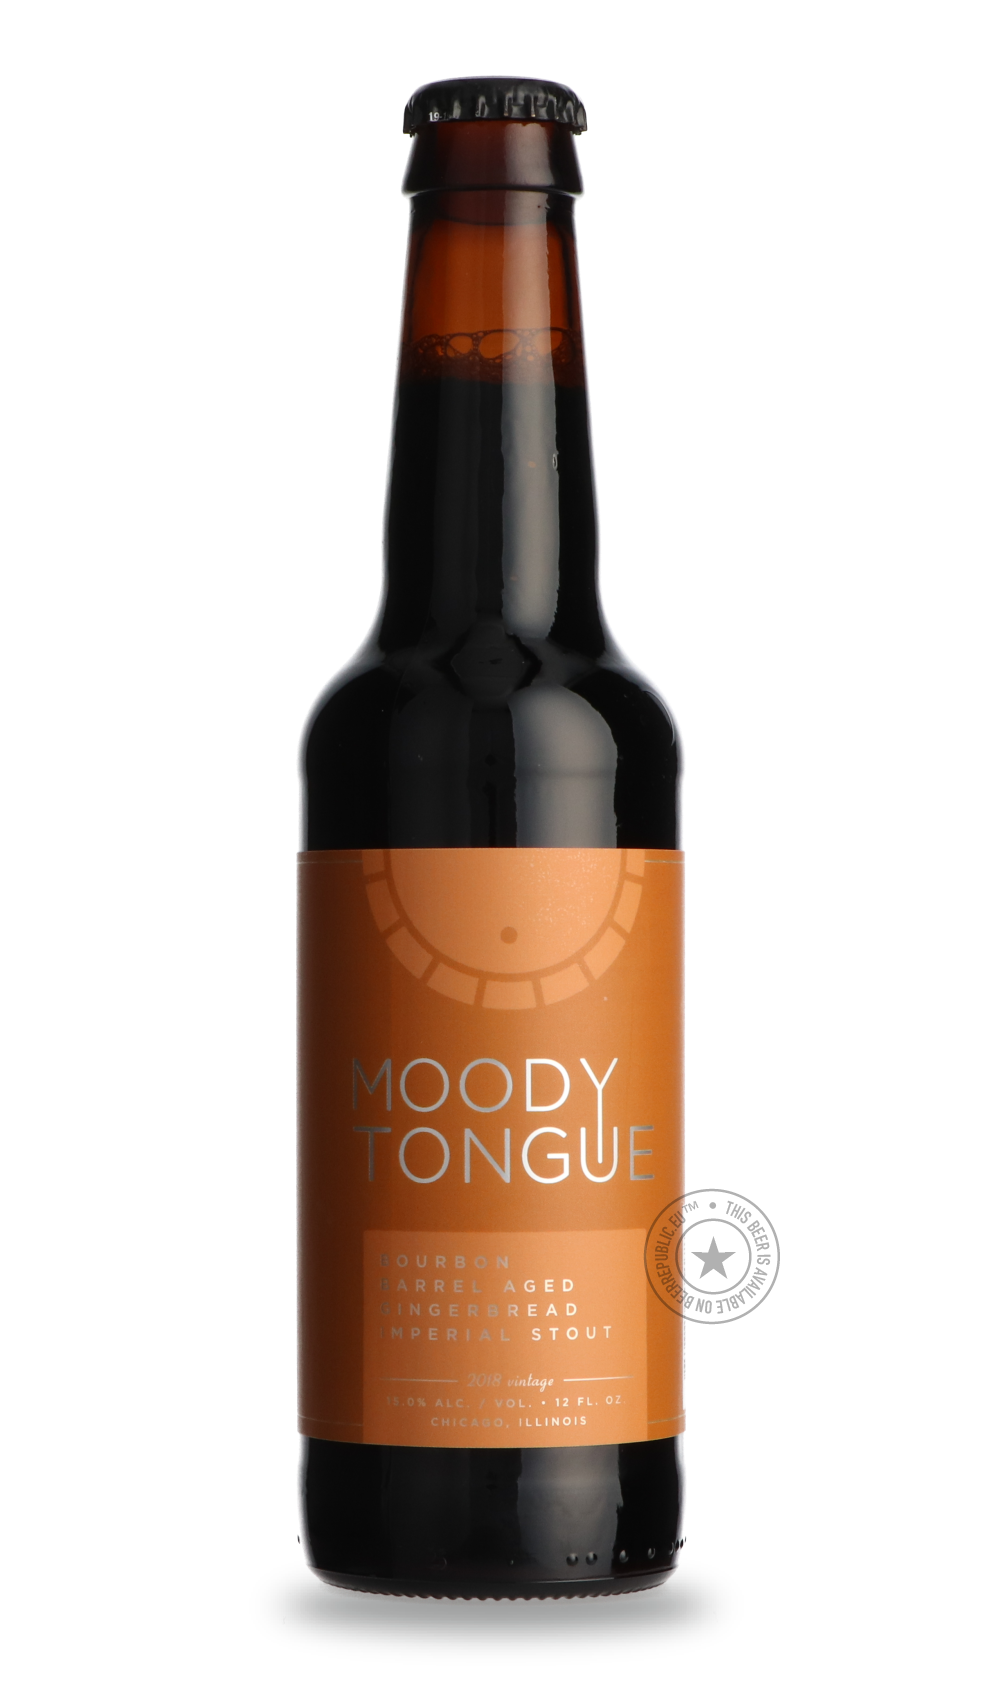 -Moody Tongue- Bourbon Barrel Aged Gingerbread Imperial Stout-Stout & Porter- Only @ Beer Republic - The best online beer store for American & Canadian craft beer - Buy beer online from the USA and Canada - Bier online kopen - Amerikaans bier kopen - Craft beer store - Craft beer kopen - Amerikanisch bier kaufen - Bier online kaufen - Acheter biere online - IPA - Stout - Porter - New England IPA - Hazy IPA - Imperial Stout - Barrel Aged - Barrel Aged Imperial Stout - Brown - Dark beer - Blond - Blonde - Pil